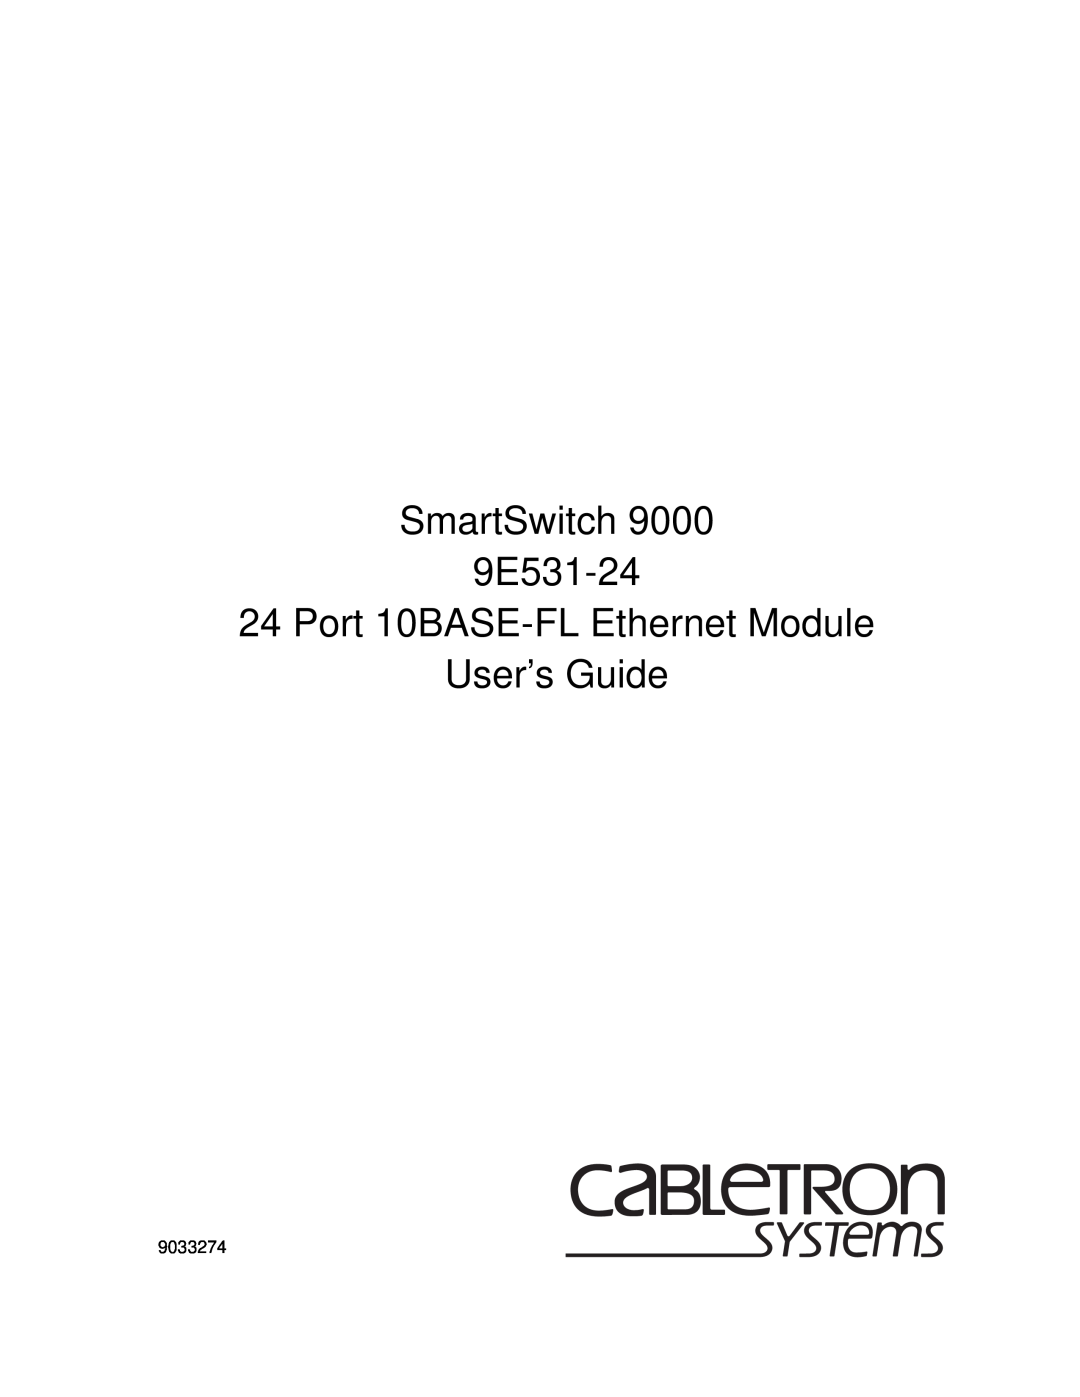 Cabletron Systems 9F122-12, 9F120-08 manual SmartSwitch 9E531-24 24 Port 10BASE-FL Ethernet Module User’s Guide, 9033274 